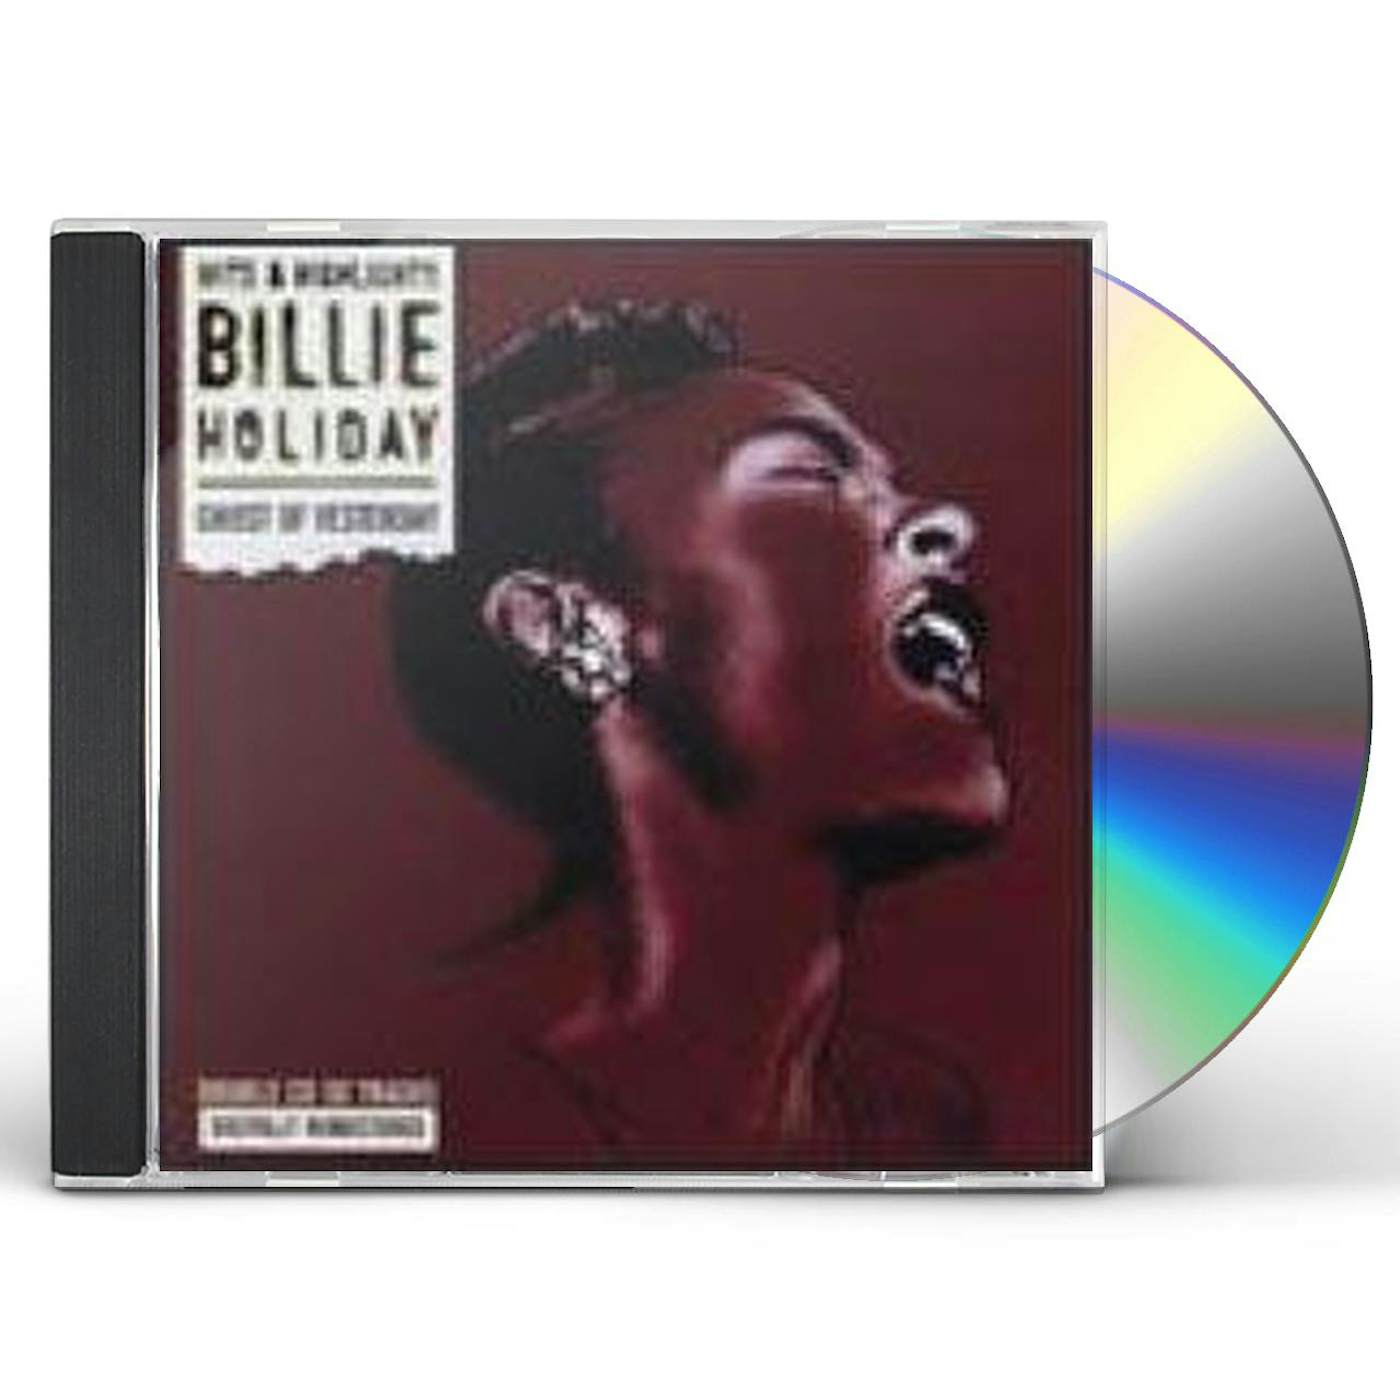 Billie Holiday GHOST OF YESTERDAY CD